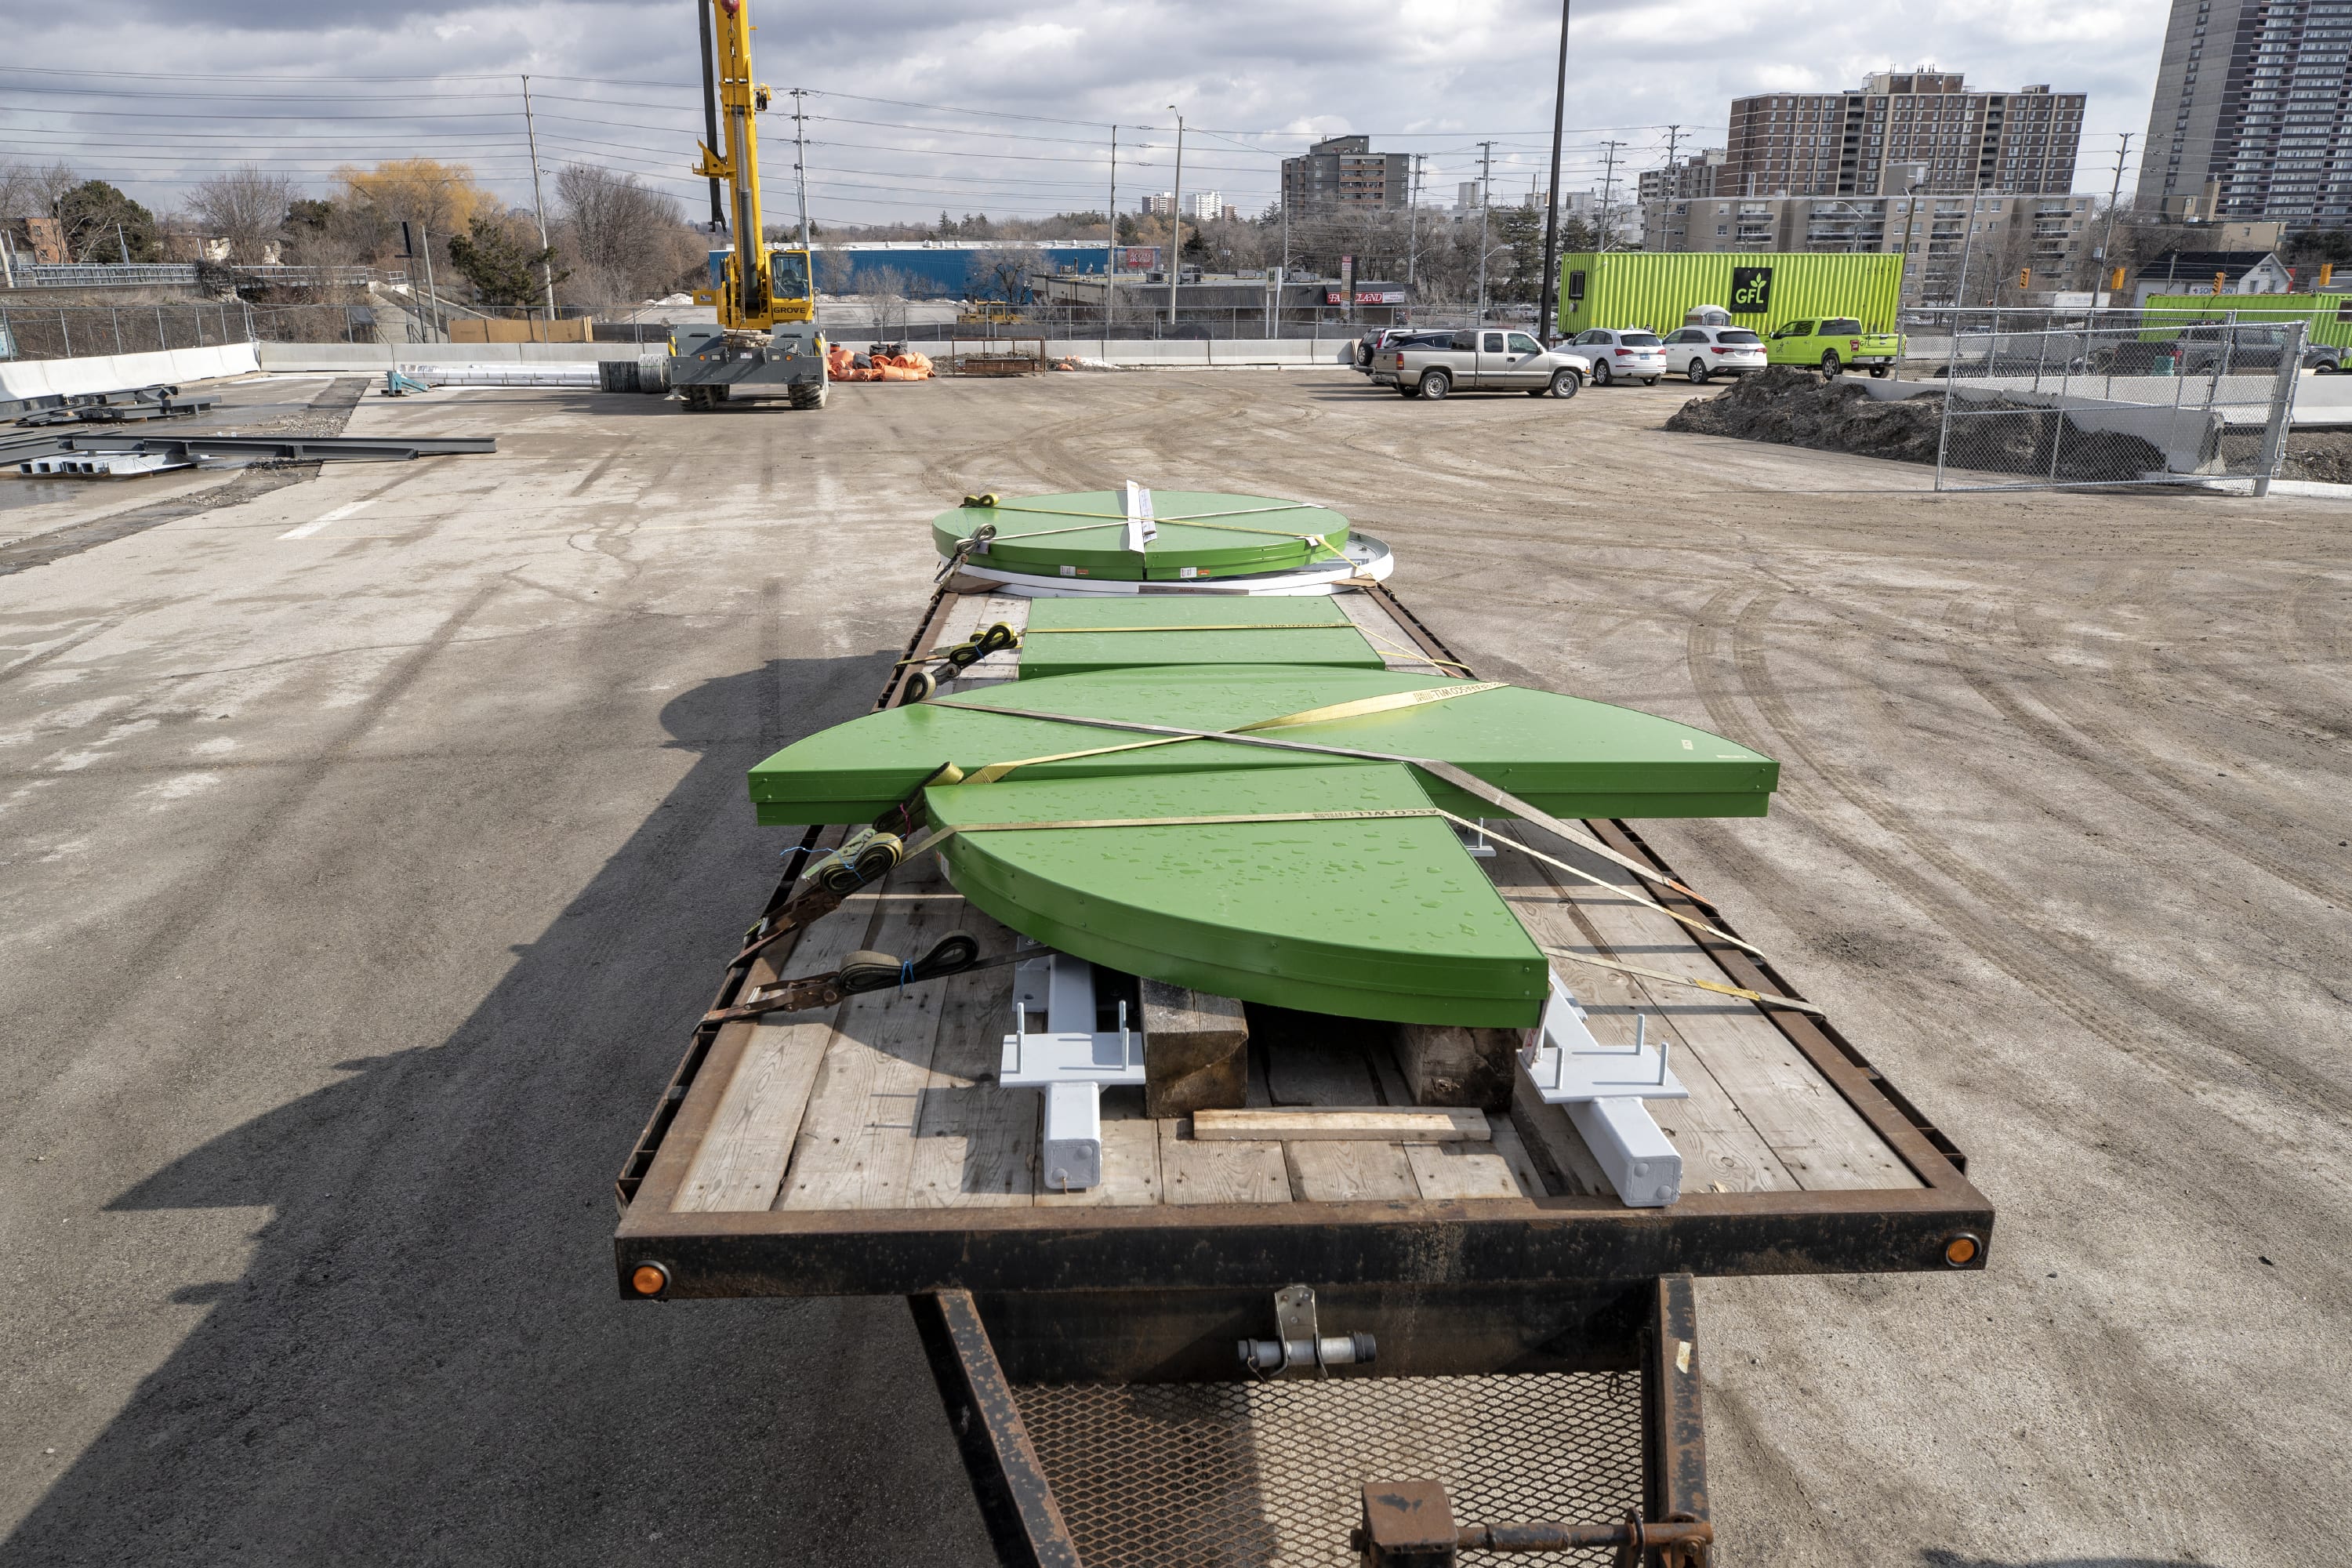 The iconic green GO letters sit on a flatbed truck waiting to be installed.